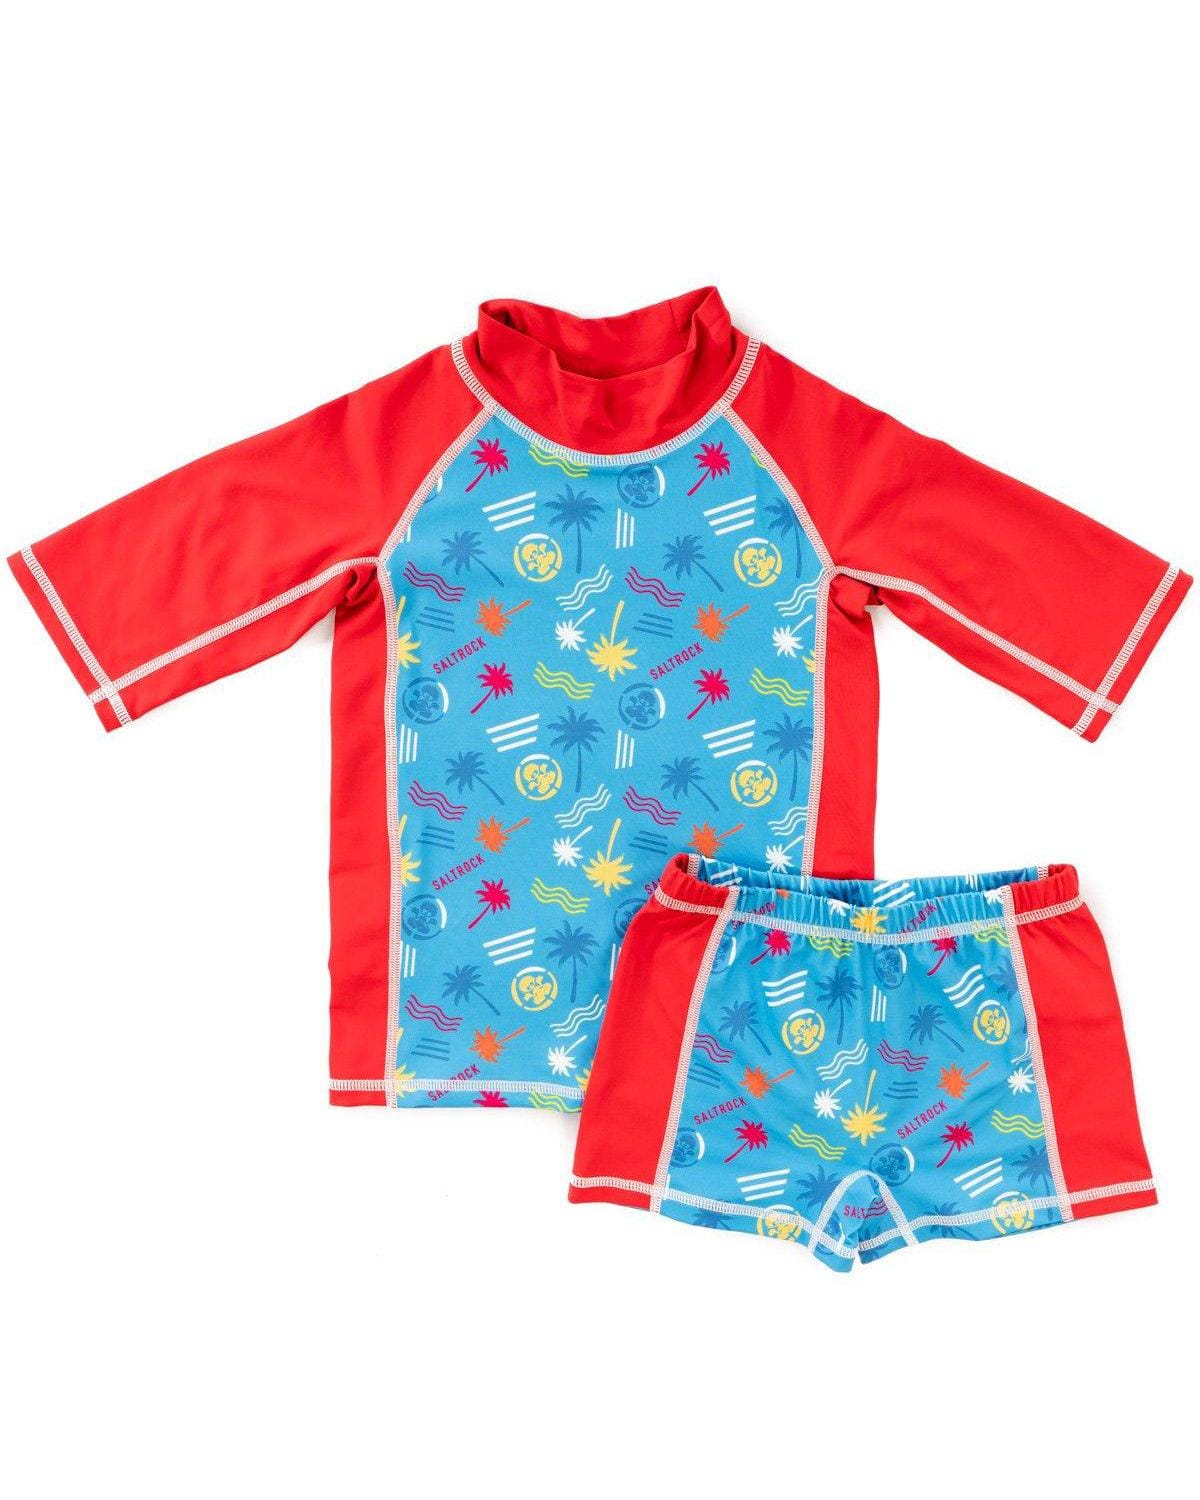 Tropical Mix - Kids Sunsuit - Blue/Red, Blue / 3-4 Years